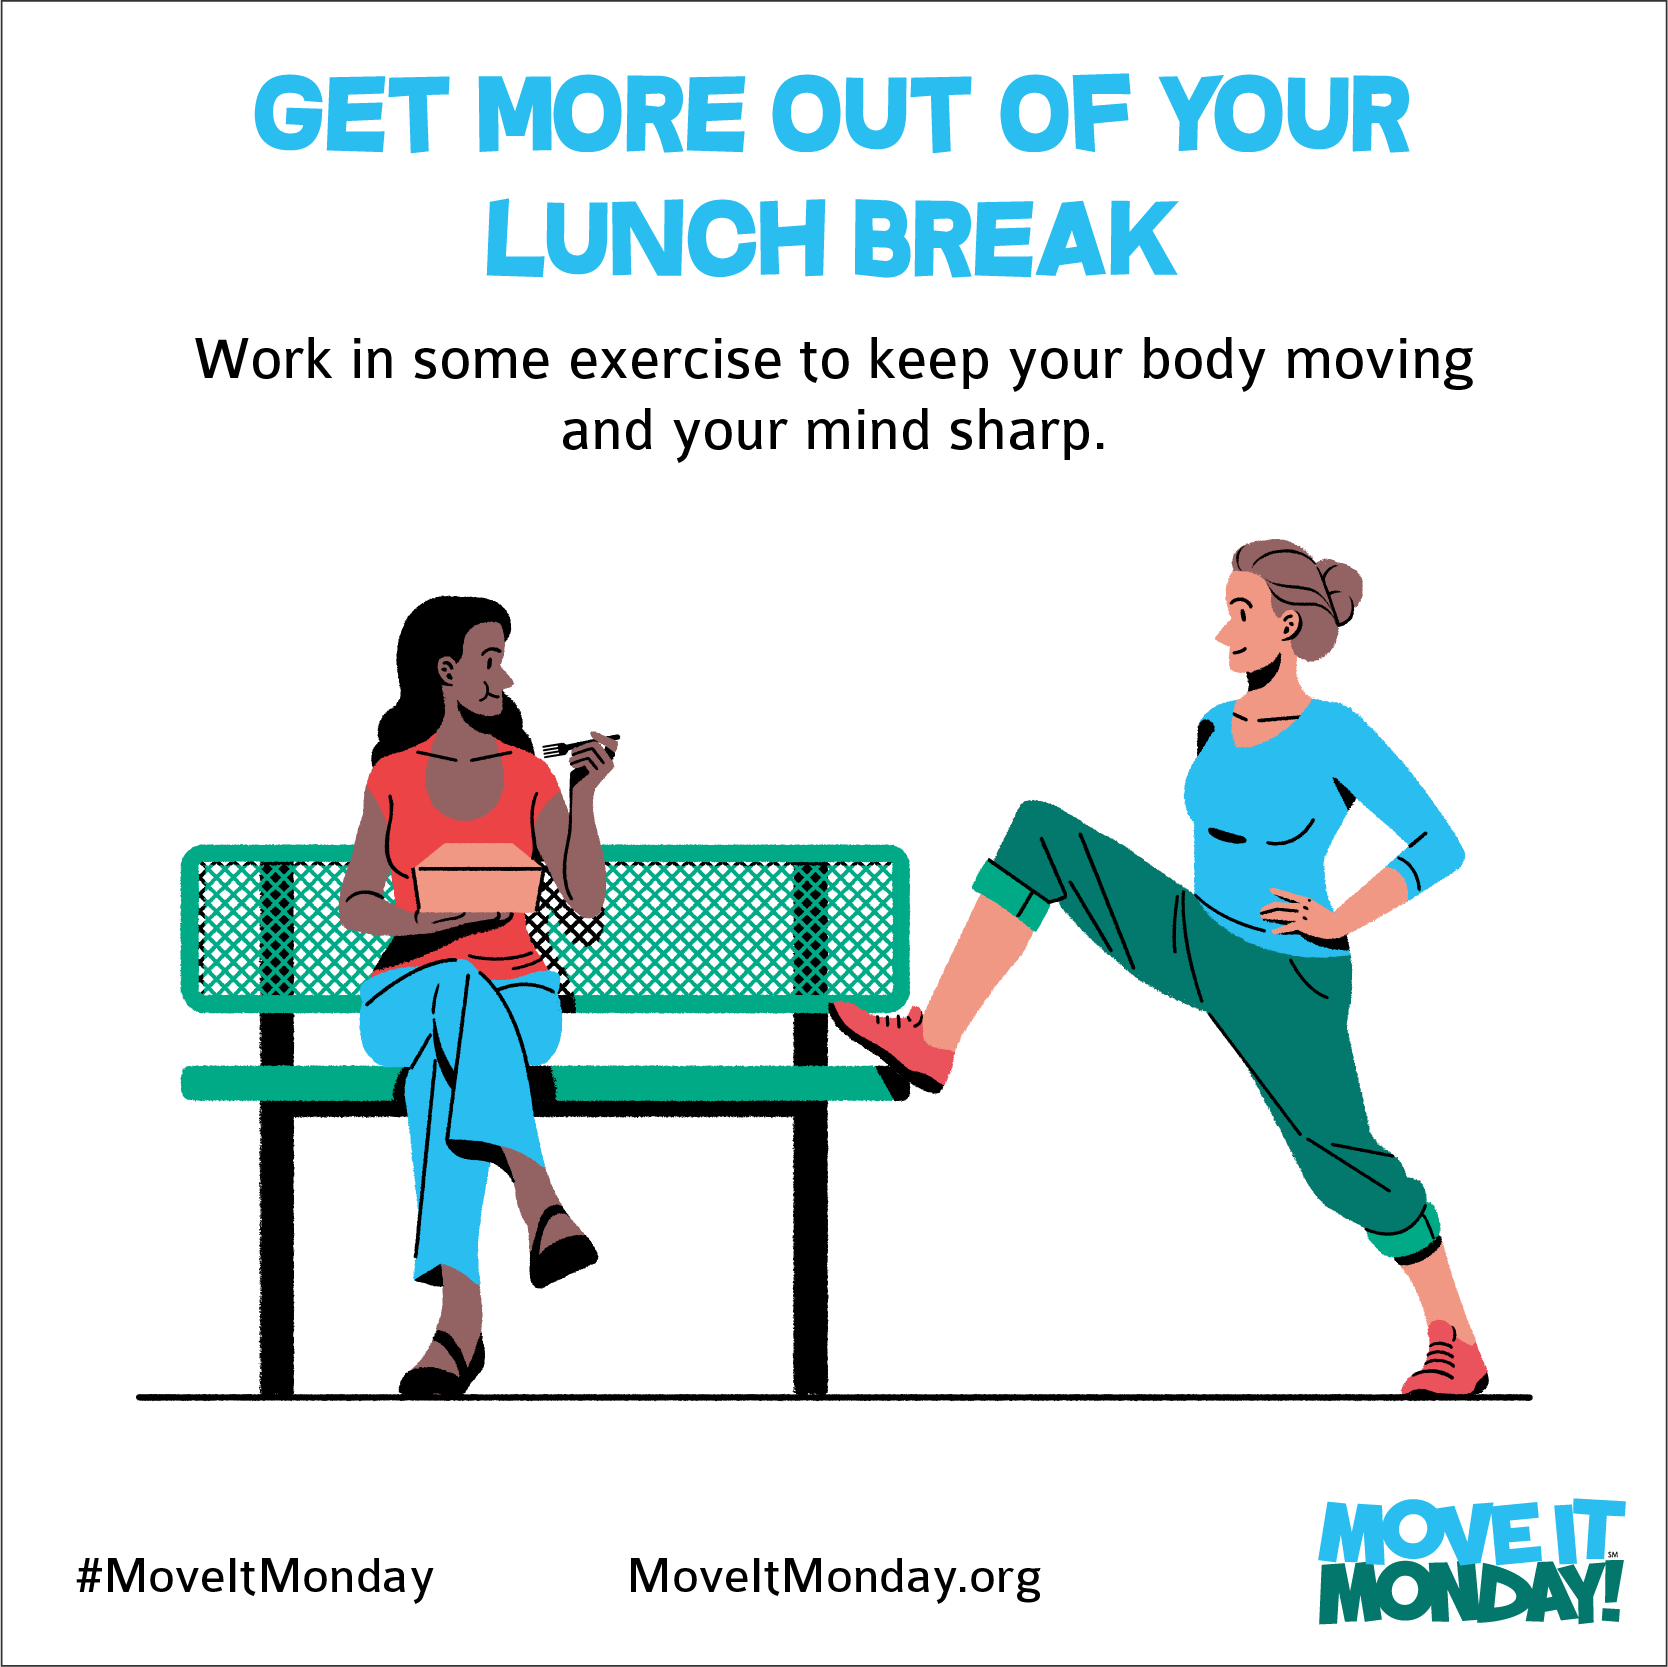 Make the most of your lunch break with these 6 easy workouts